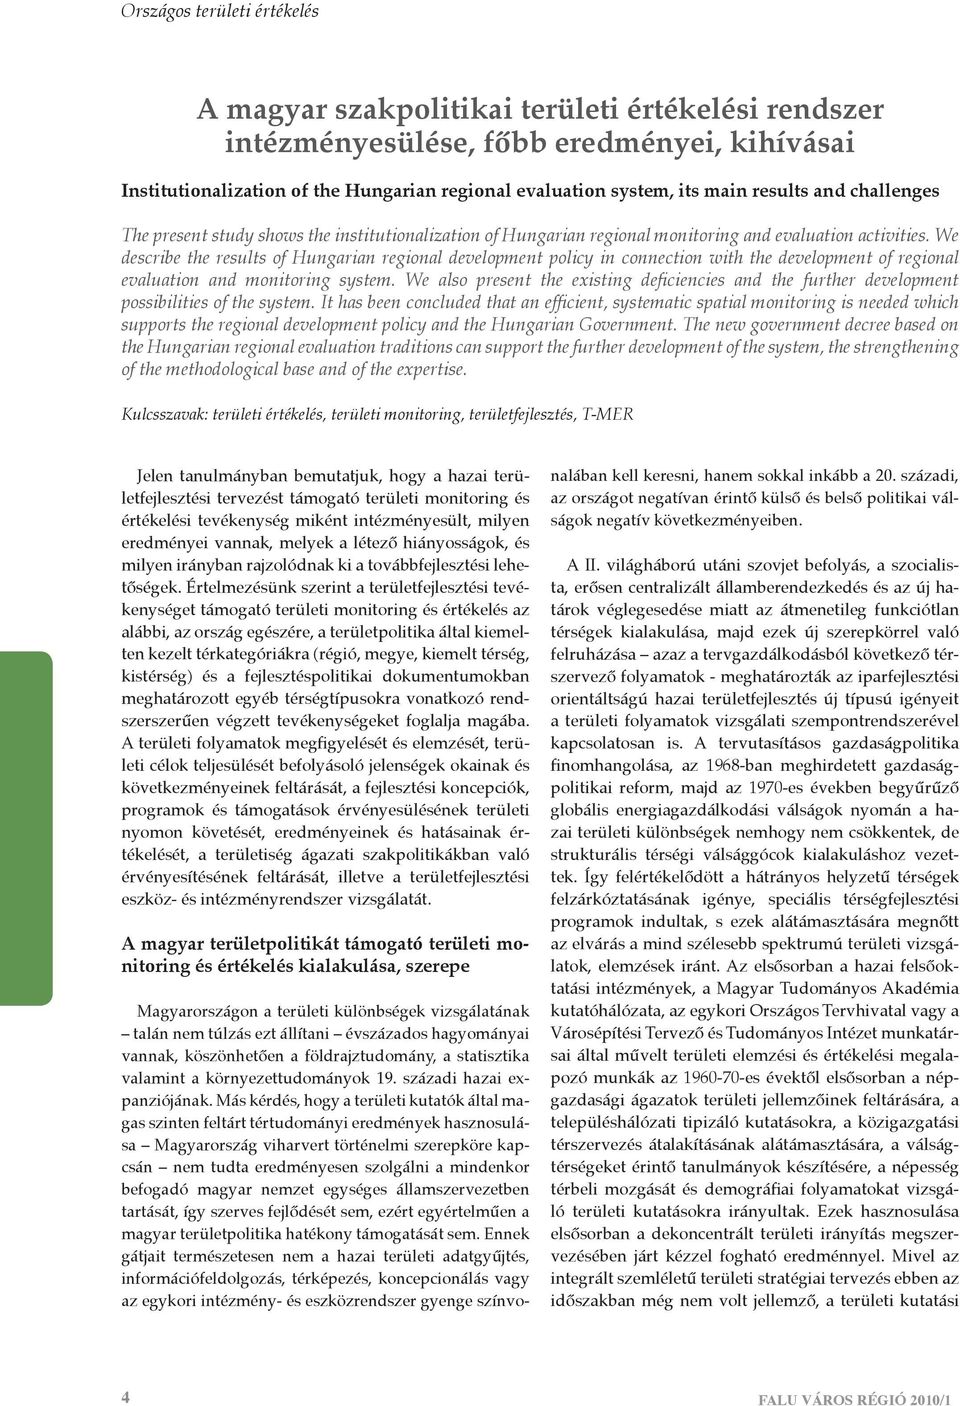 We describe the results of Hungarian regional development policy in connection with the development of regional evaluation and monitoring system.